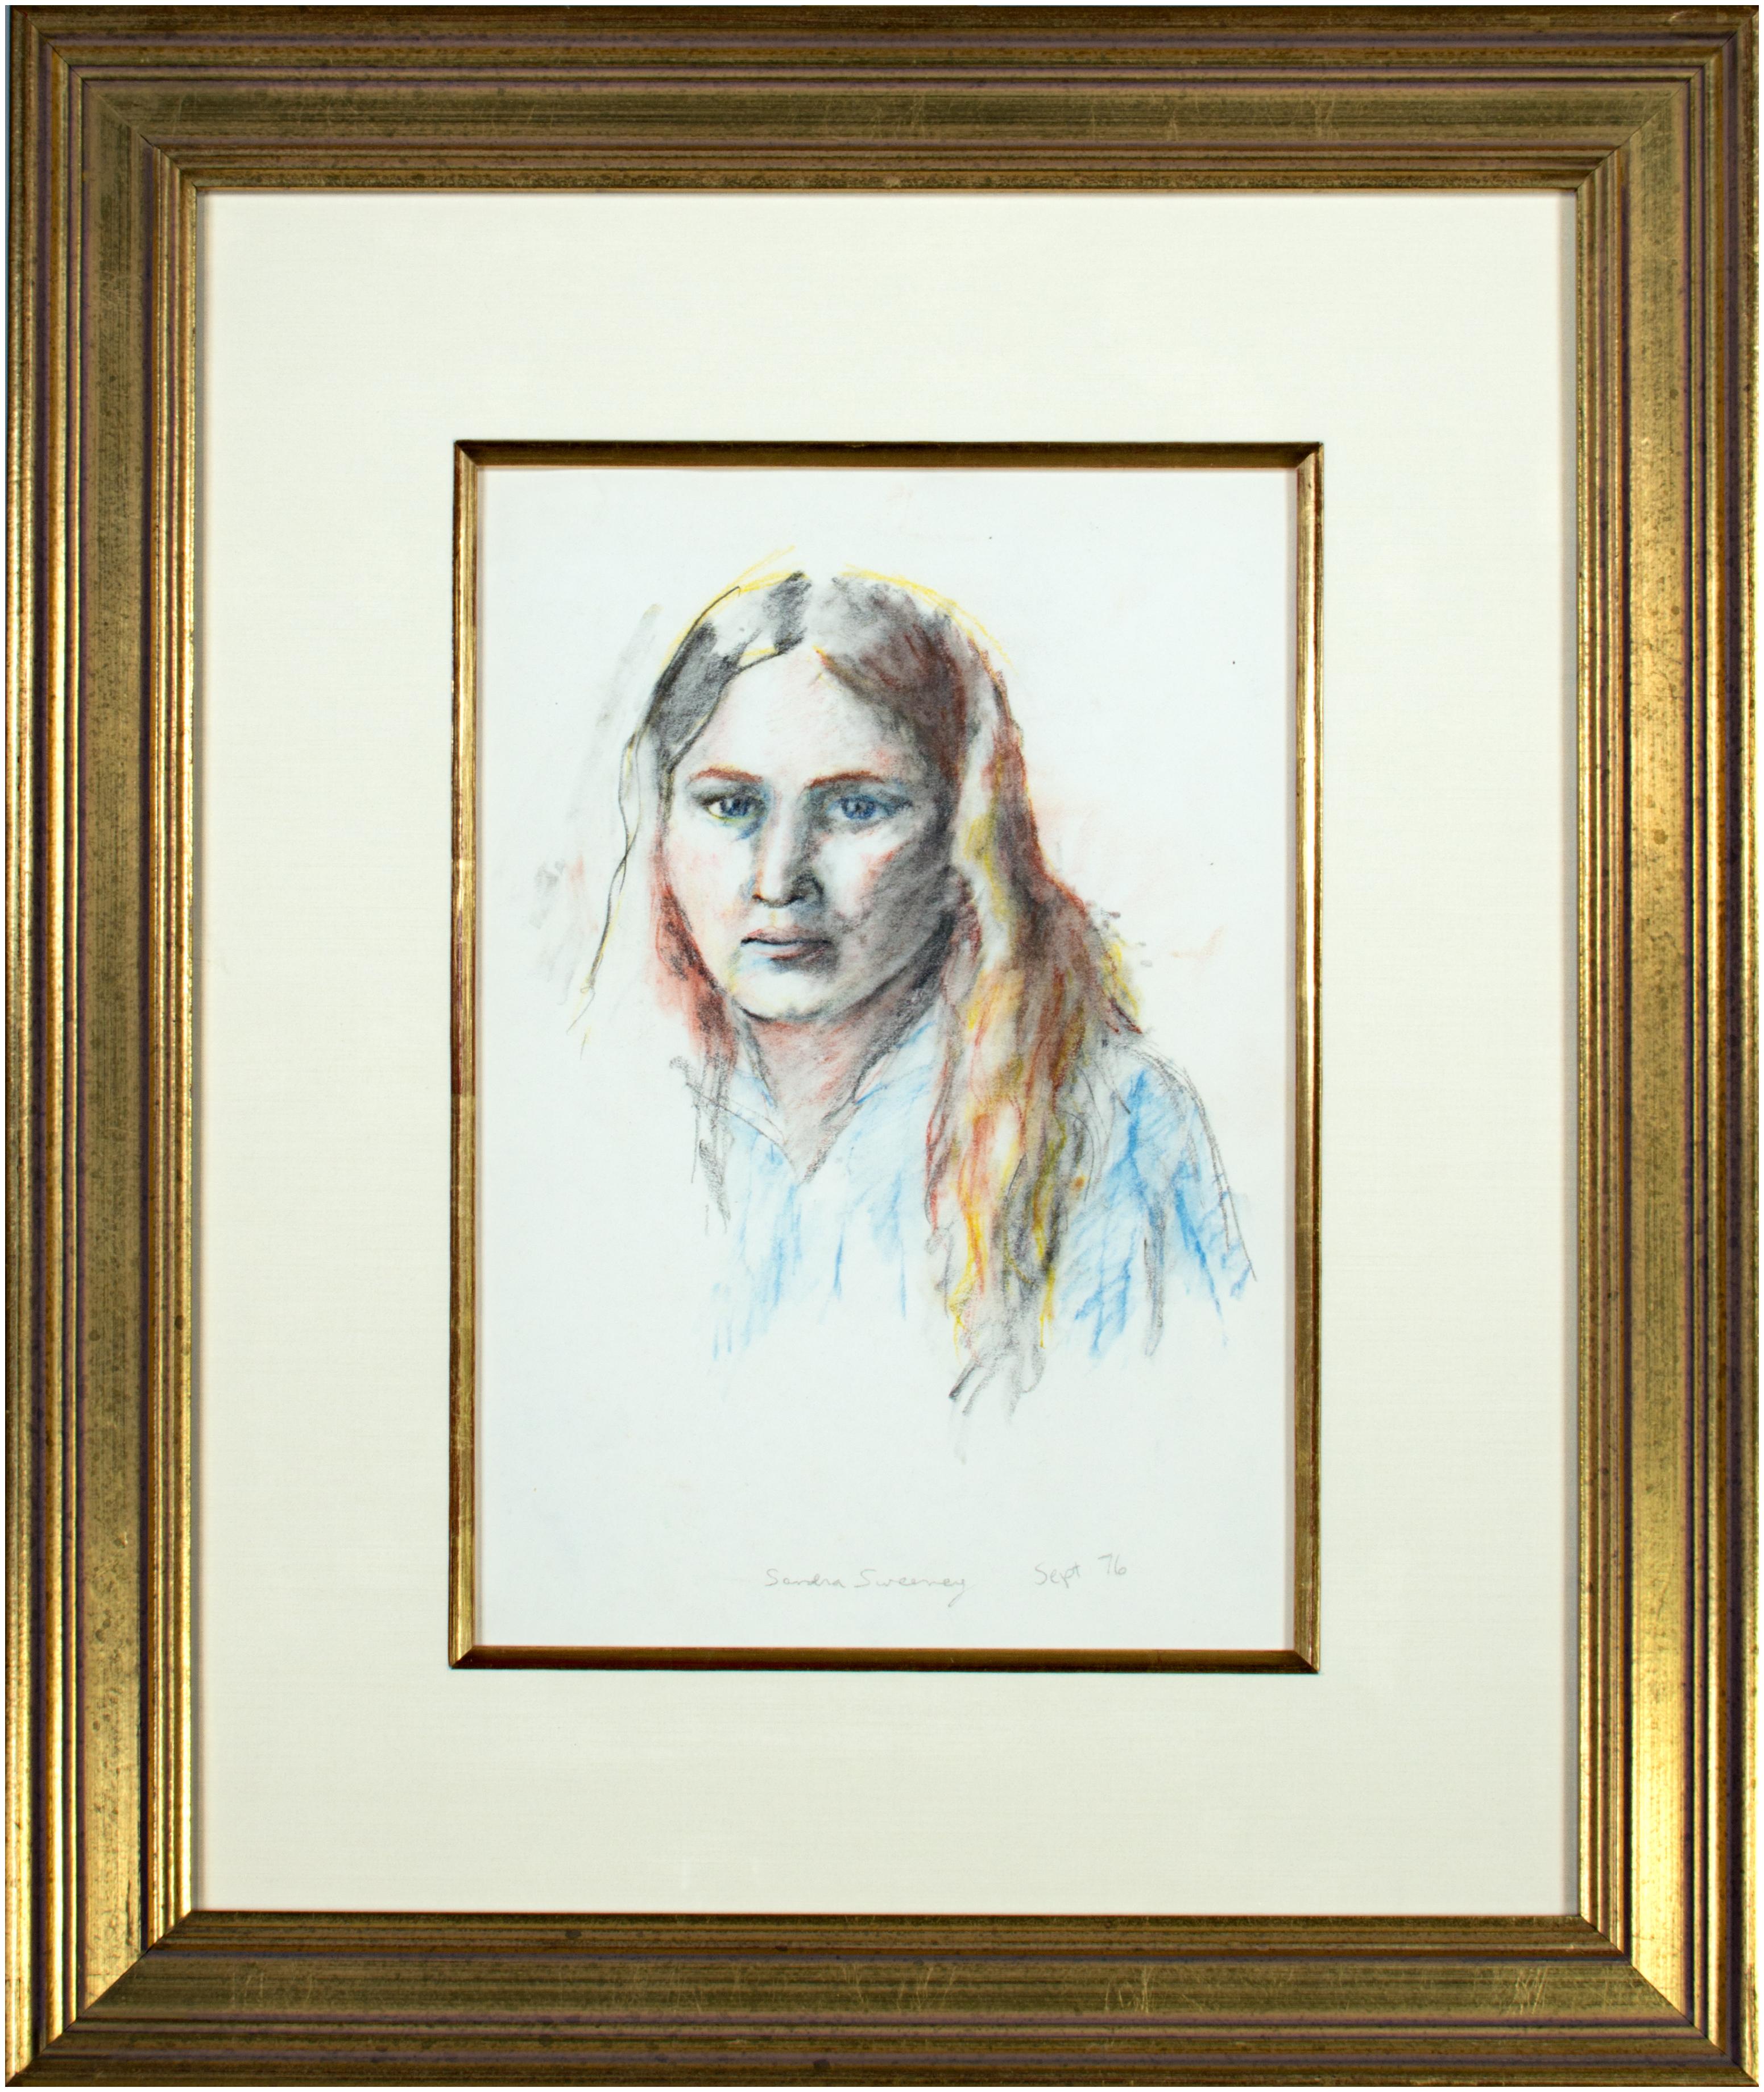 'Self Portrait' original pastel and graphite drawing signed by Sandra Sweeney